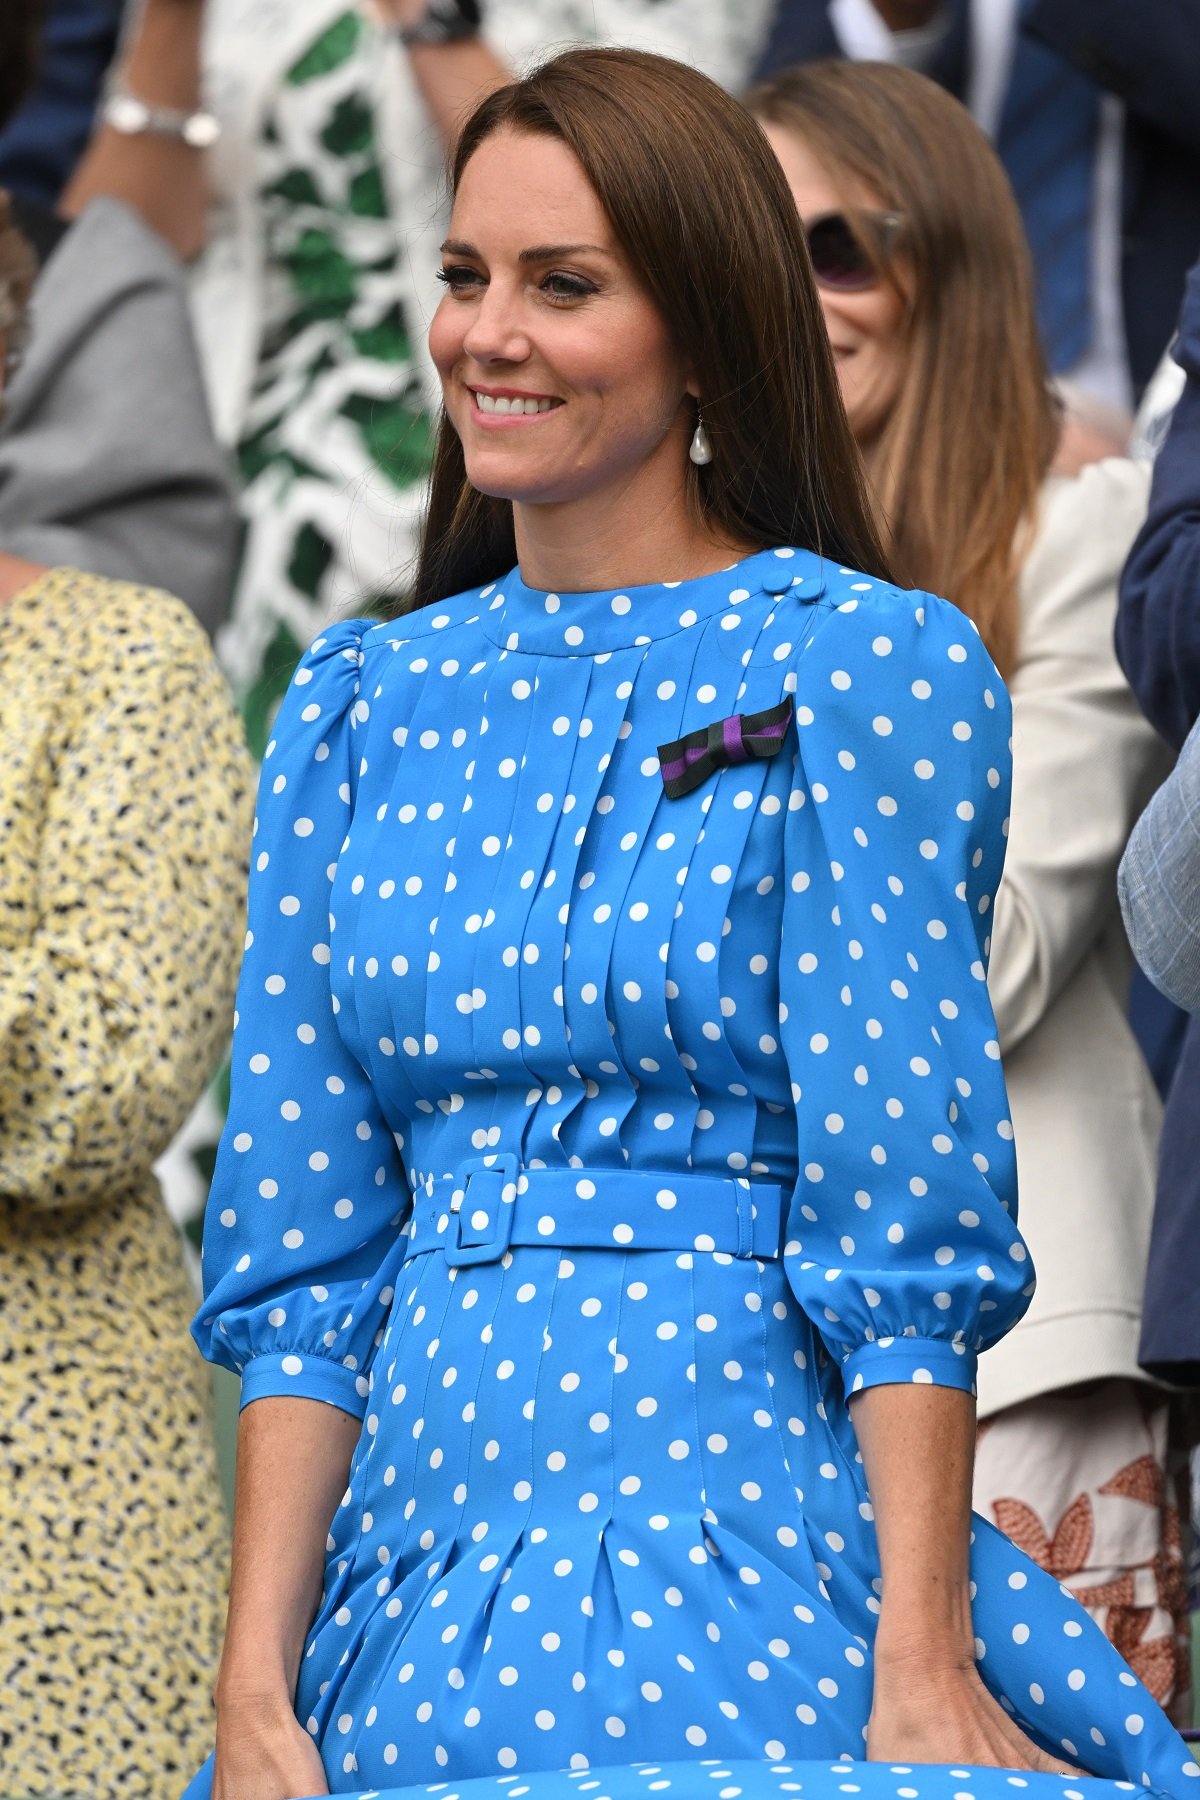 Kate Middleton smiling at All England Lawn Tennis and Croquet Club in a light blue polka dot dress